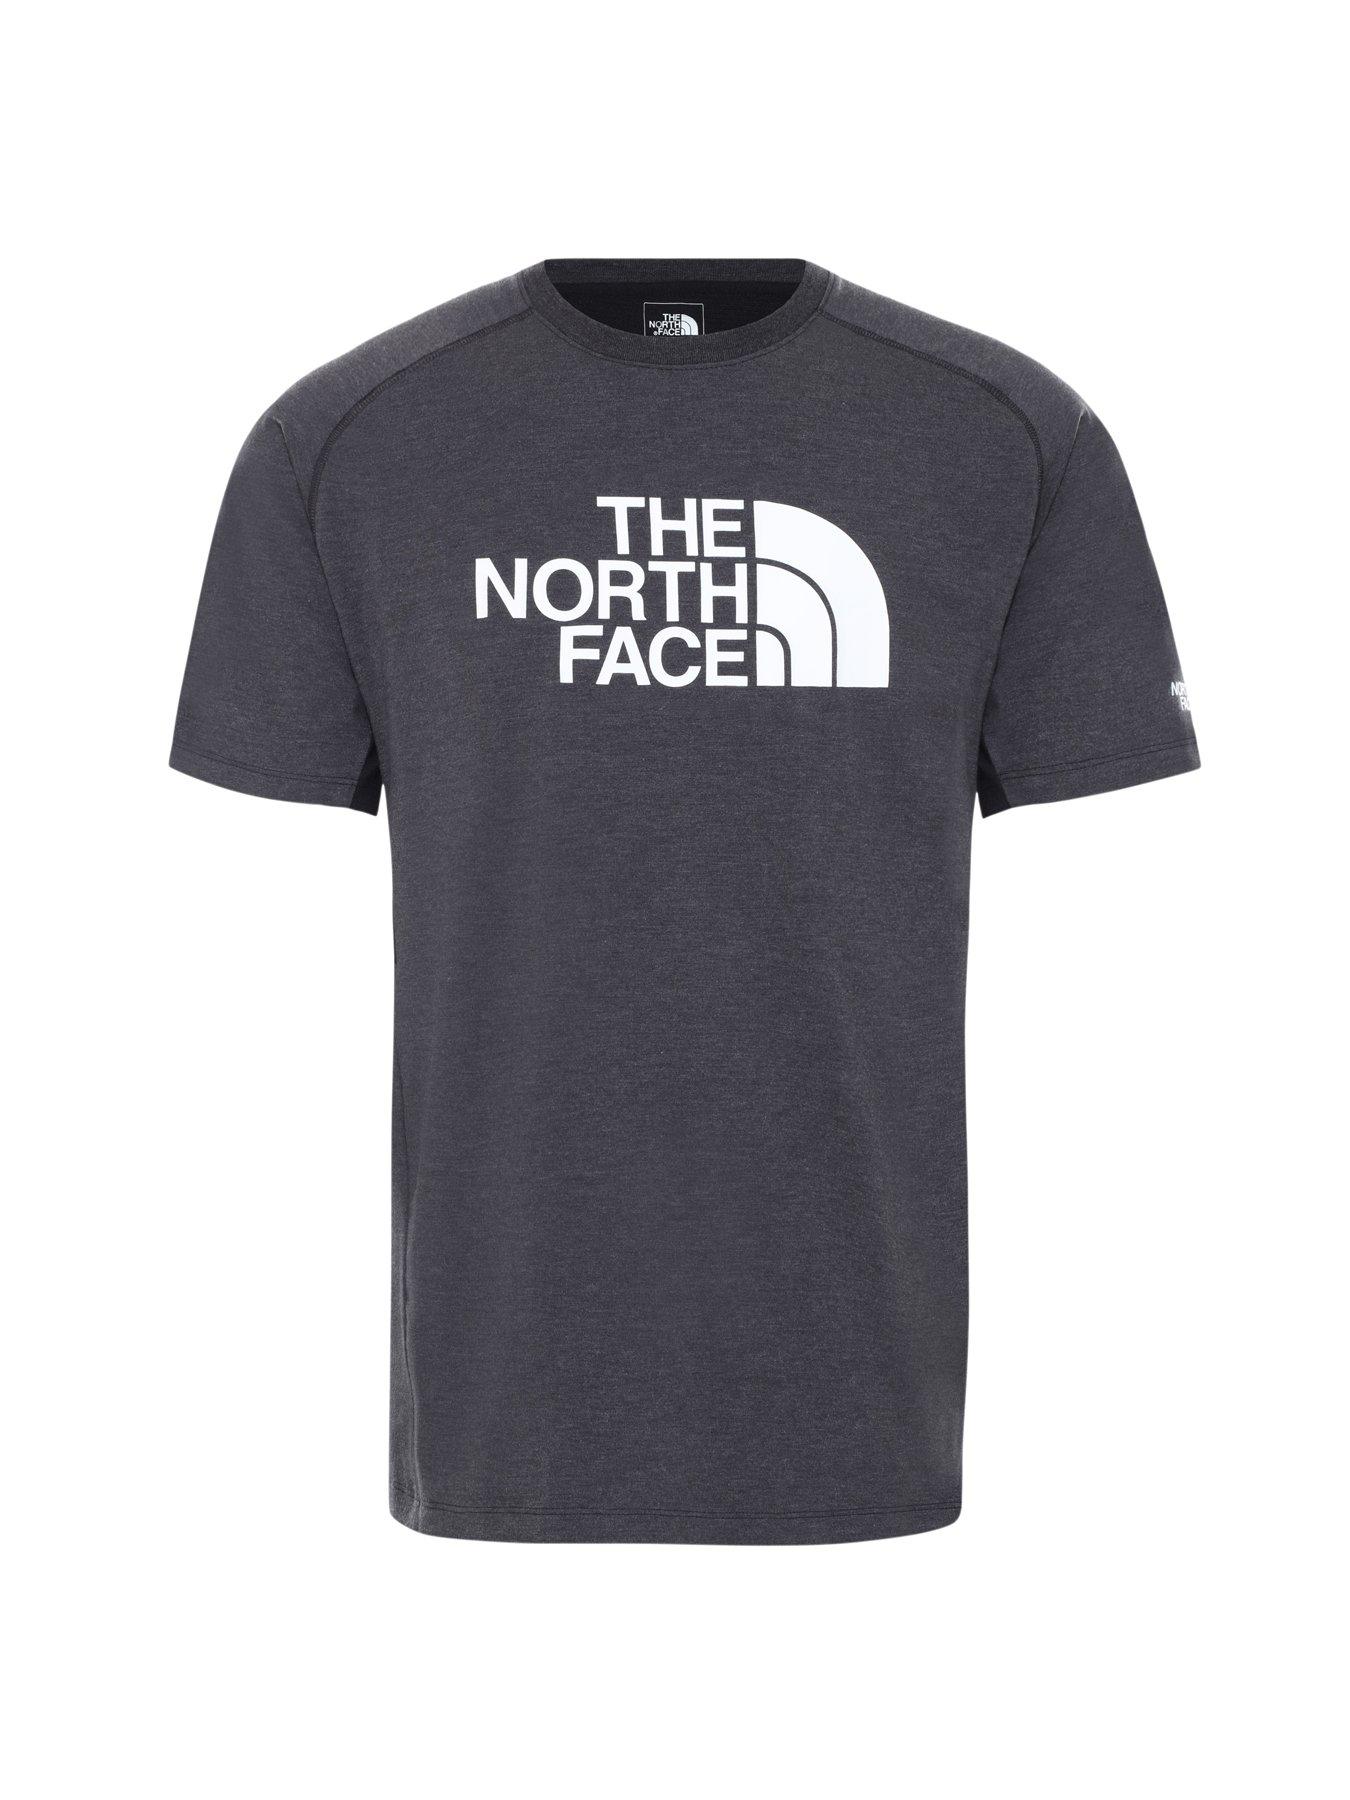 THE NORTH FACE Wicker Graphic T-shirt | very.co.uk